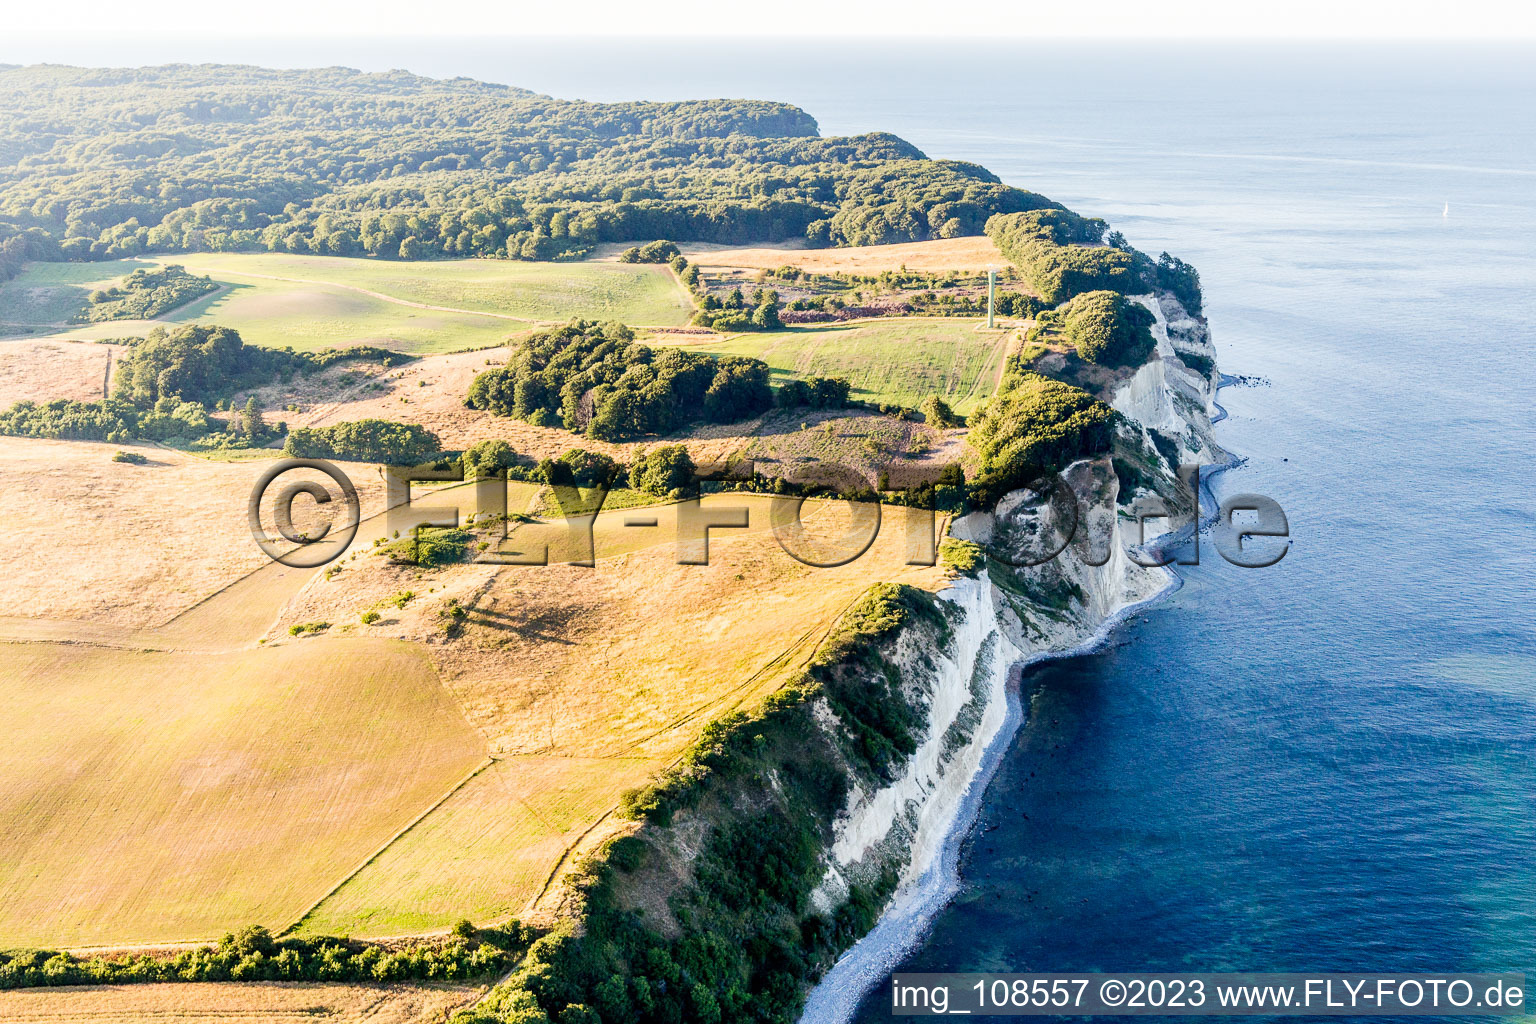 Borre in the state Zealand, Denmark seen from above